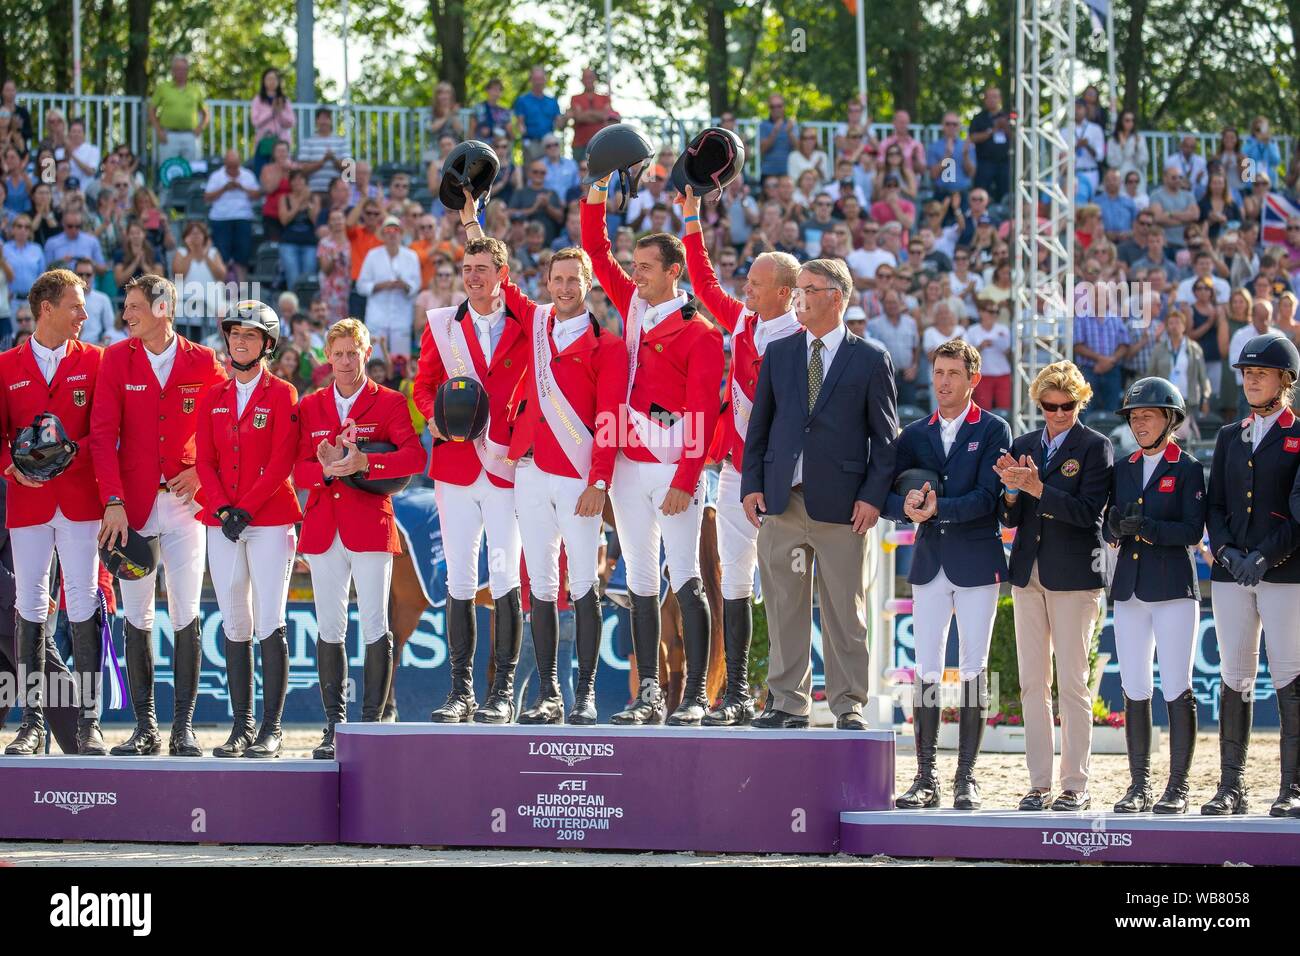 Rotterdam. Netherlands. 23 August 2019. Team Gold Medal. Team Belgium.  L-R. Jos Verlooy. Pieter Devos. Gregory Wathelet. Jerome Guery and  Chef d'Equipe Peter Weinberg in the Team Final. Podium. Prizegiving. Showjumping. Longines FEI European Championships. Credit Elli Birch/SIP photo agency/Alamy live news. Stock Photo